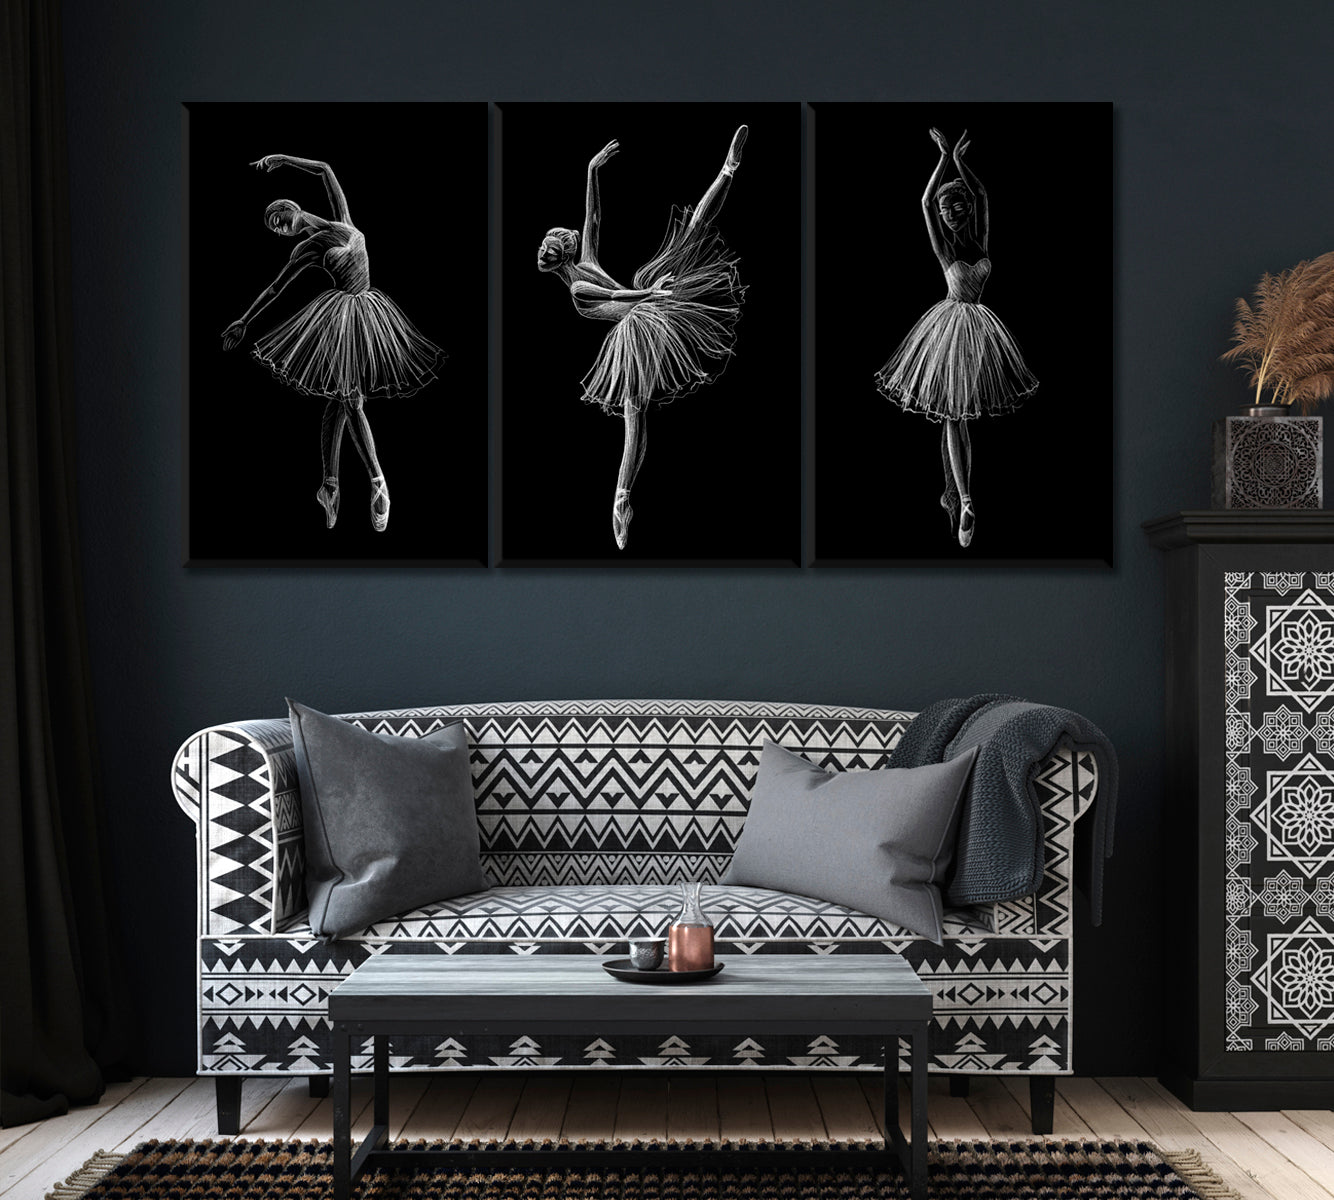 Set of 3 Ballerina in Black and White Canvas Print ArtLexy   